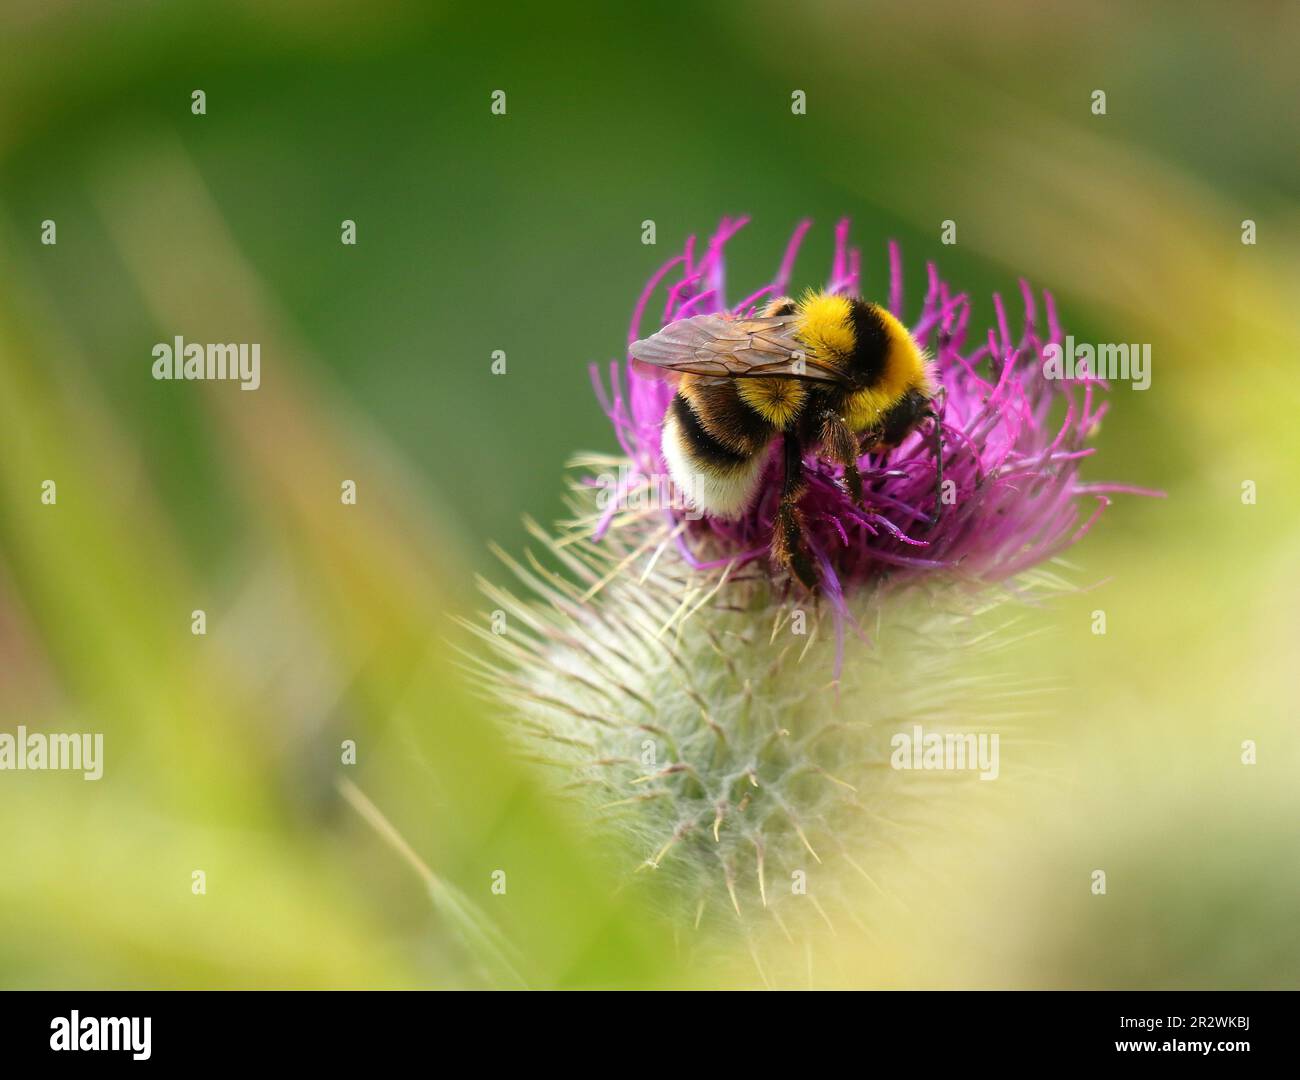 Portugal. Spring flowers. Bumble bee - bombus terrestris lusitanicus feeds on a thistle in bloom. Shallow focus on the bee for effect. Space for text Stock Photo